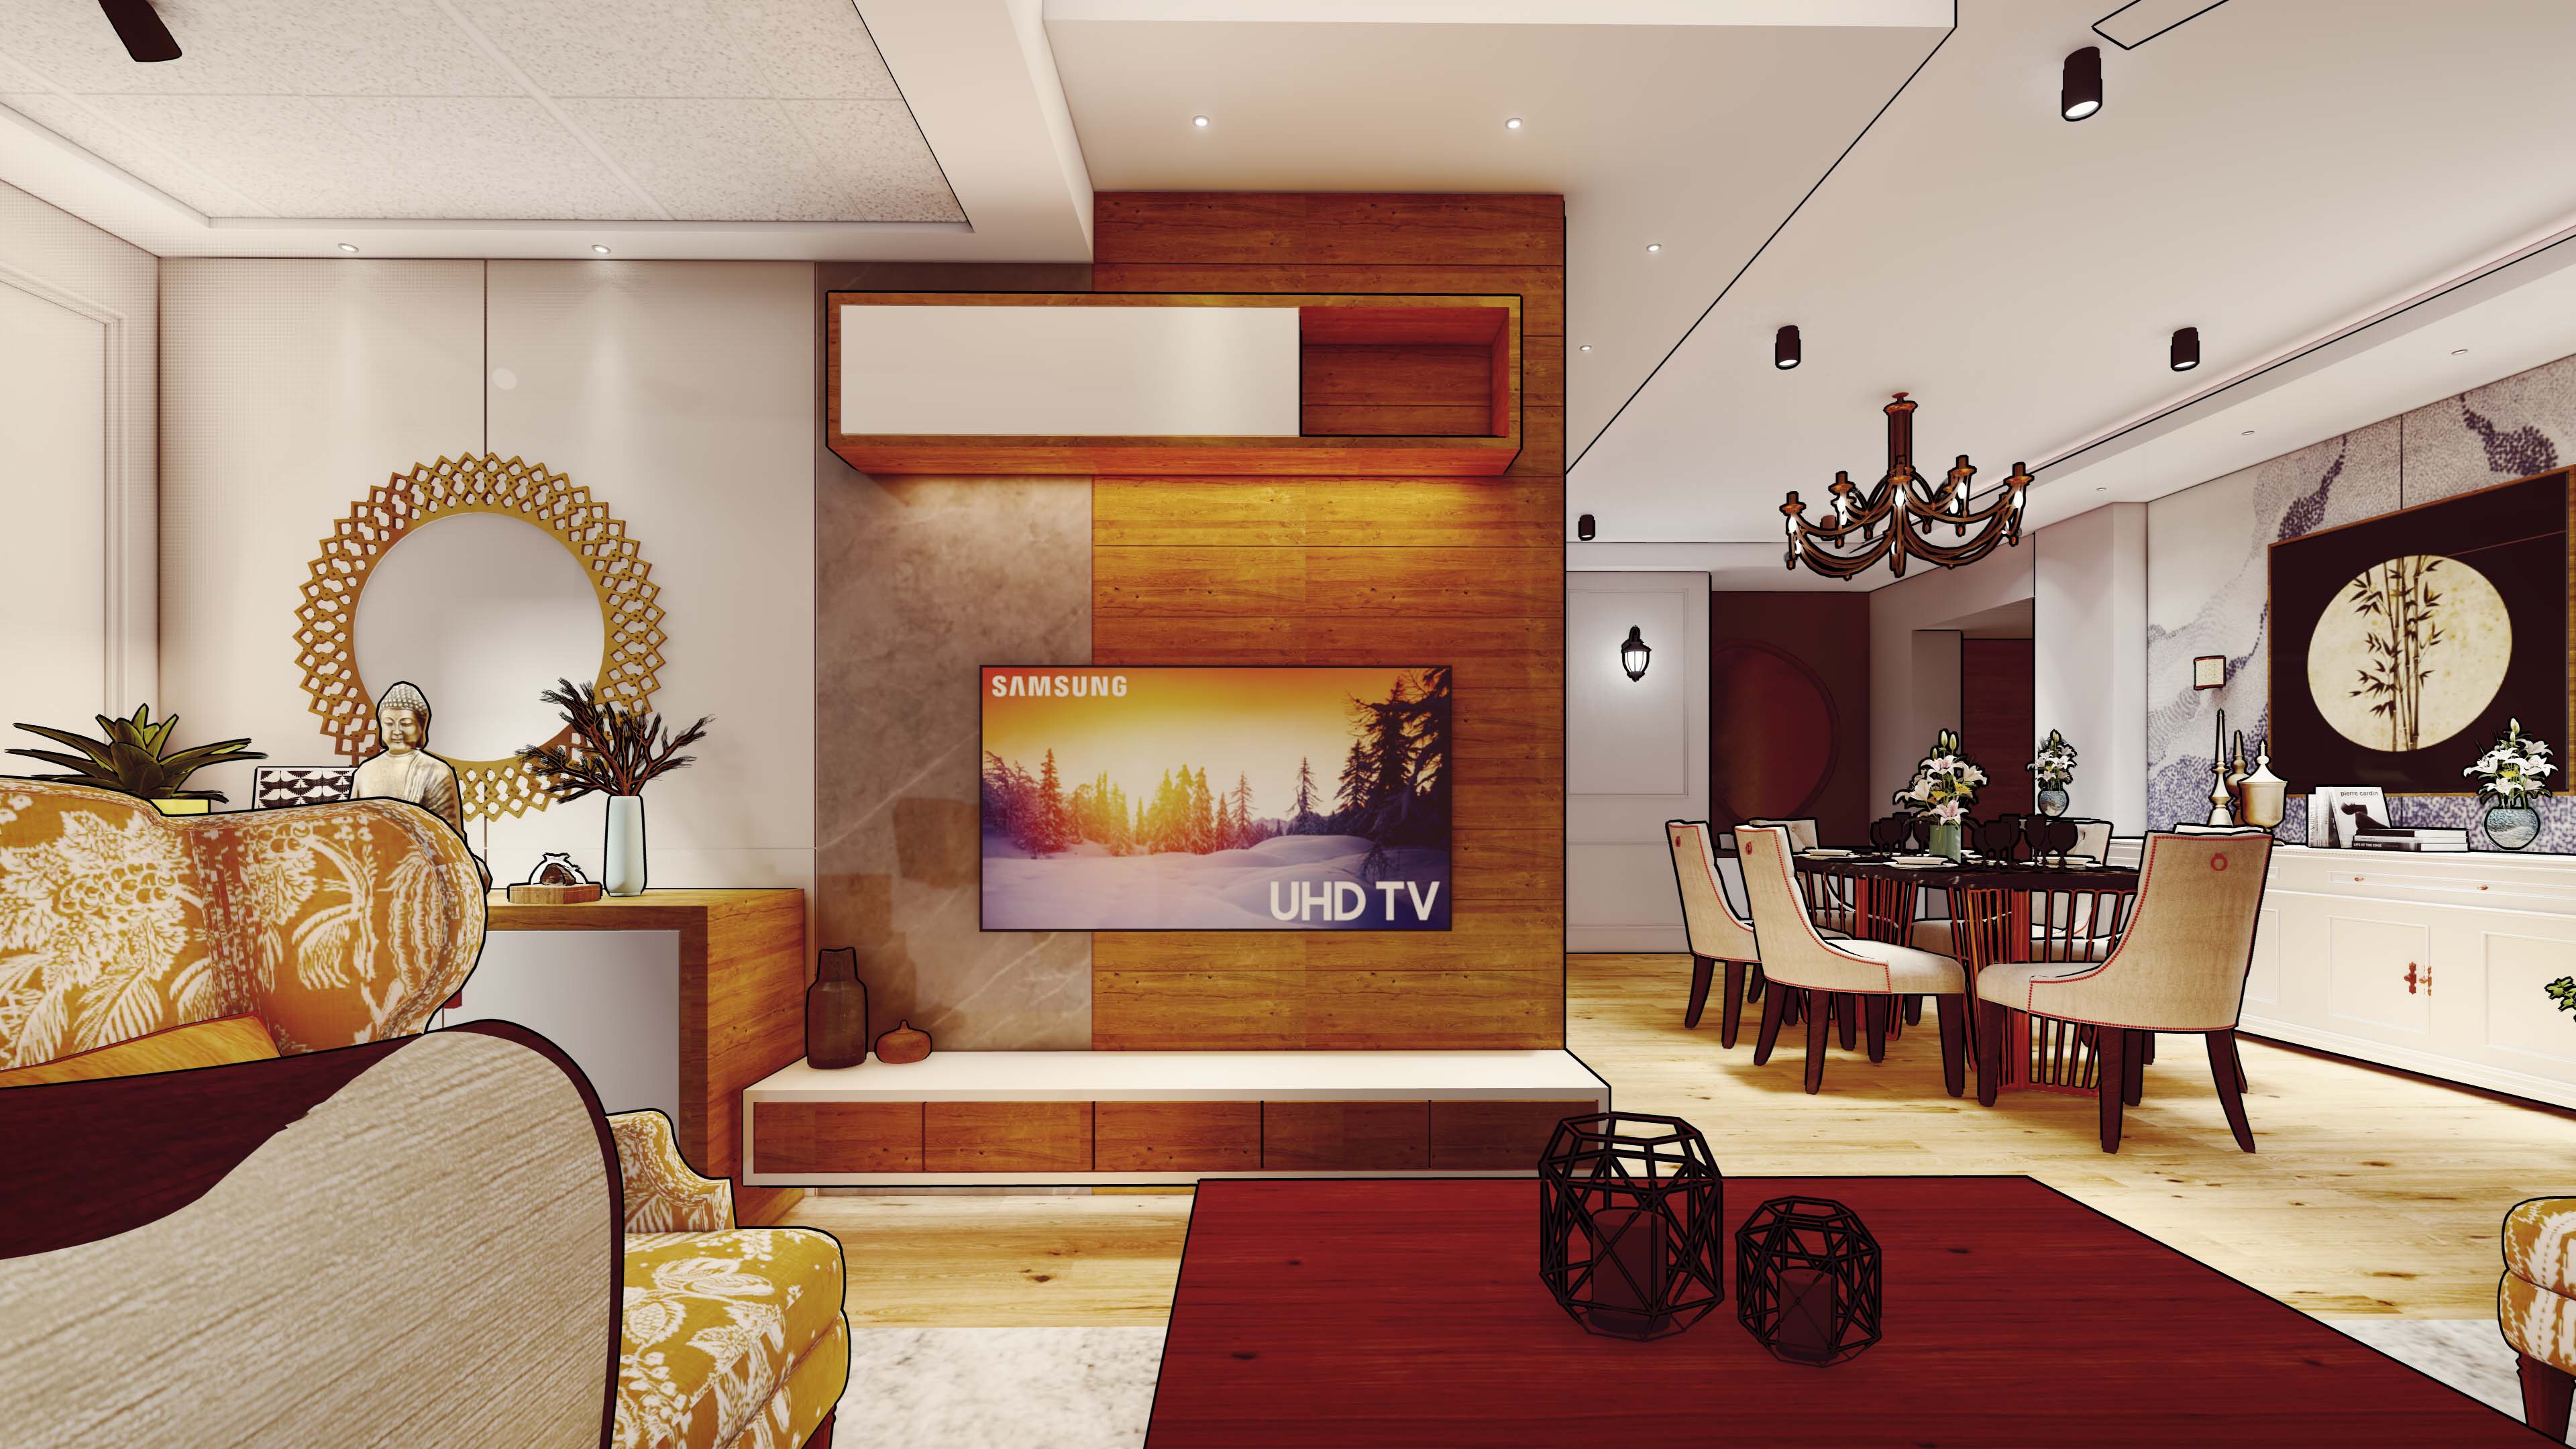 Contemporary Living hall with TV unit